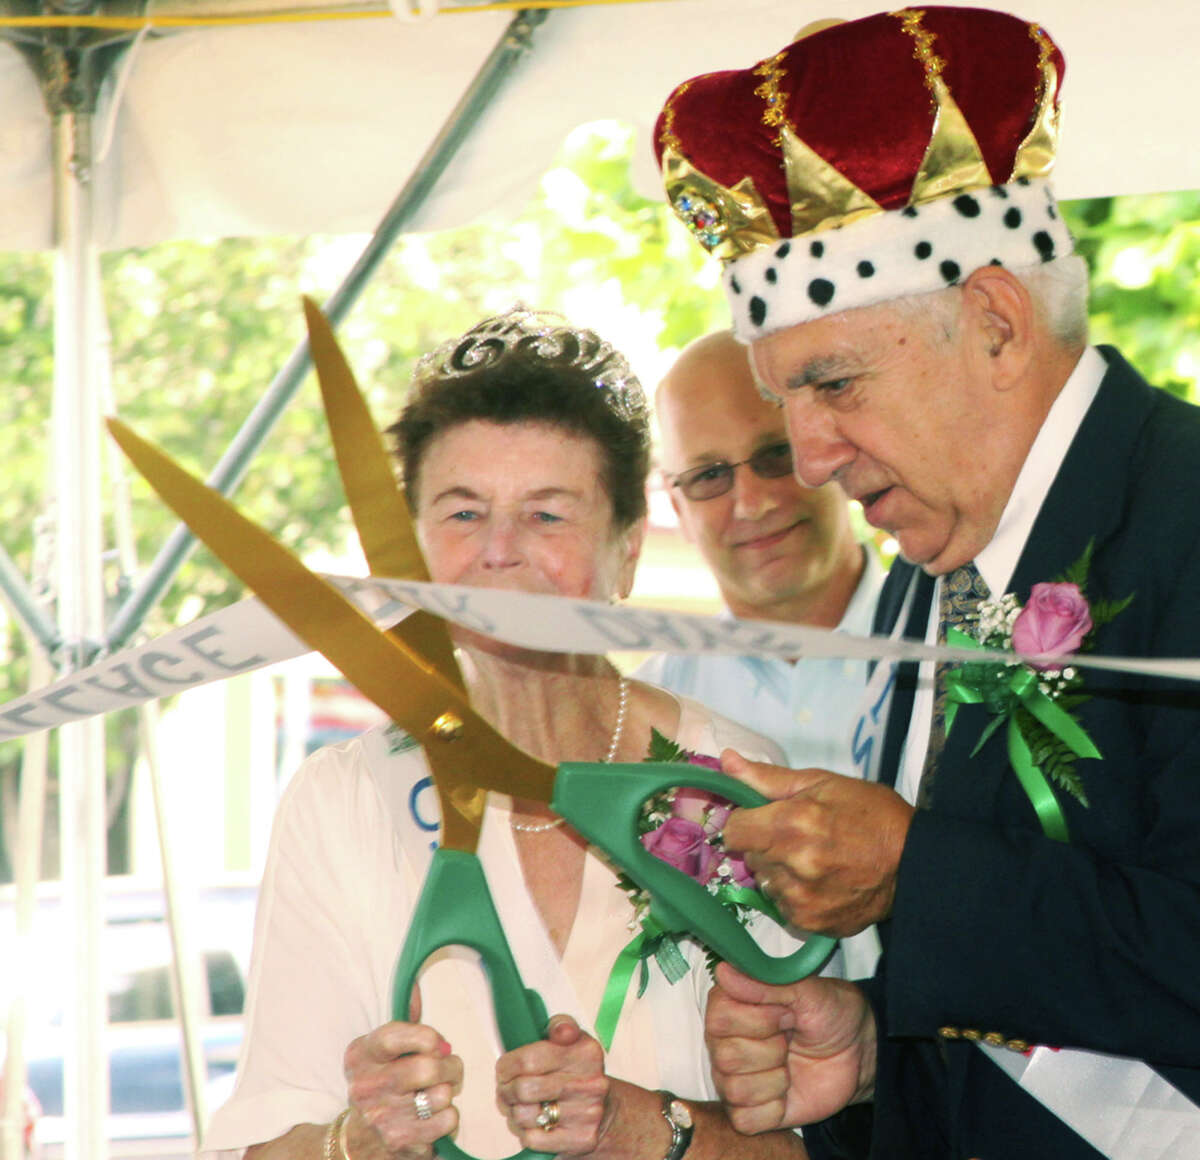 King and Queen Roland and Mary Miller handle the ribbon-cutting with aplomg as state Sen. Clark Chapin (R-30th) looks on during the opening ceremony for the Greater New Milford Chamber of Commerce's 47th annual Village Fair Days for July 25-26, 2014 on the Village Green and environs.